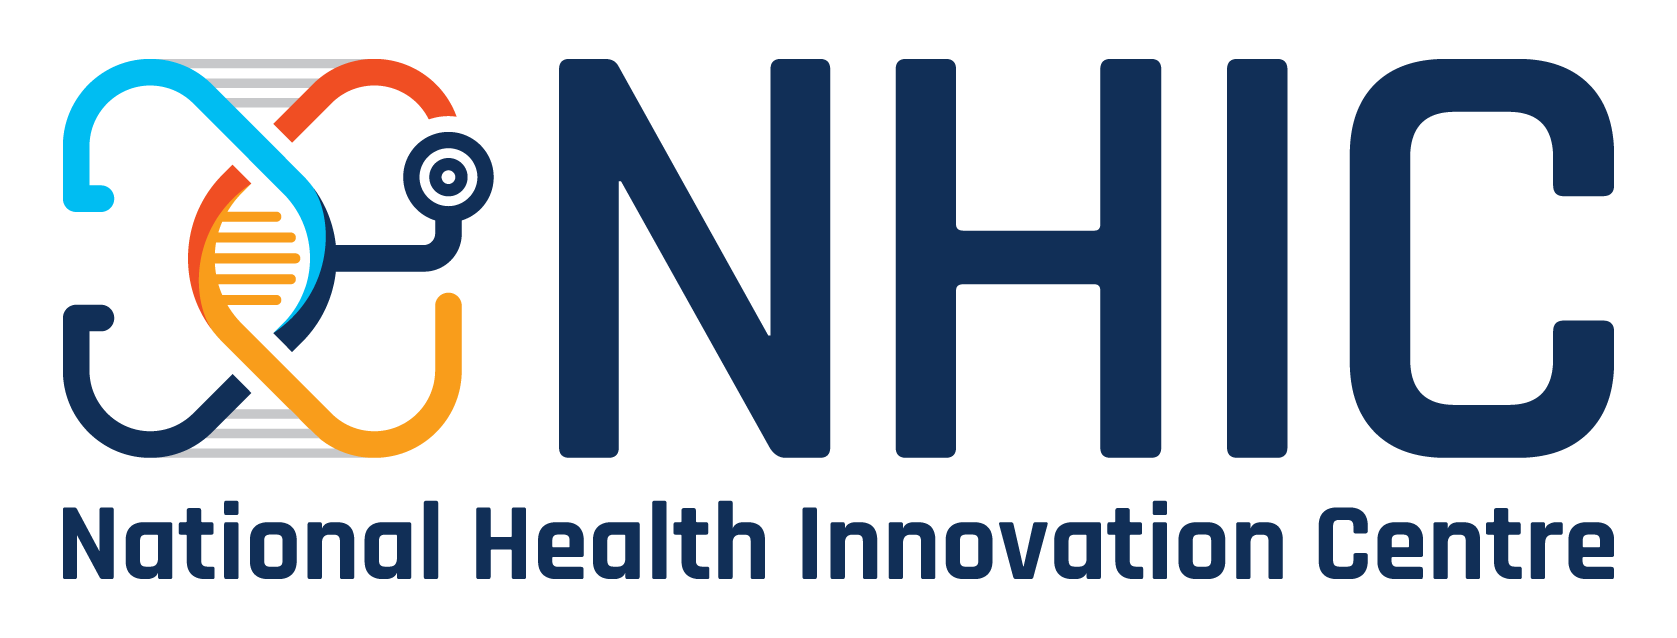 NHIC_Corporate Logo_Full Colour.png